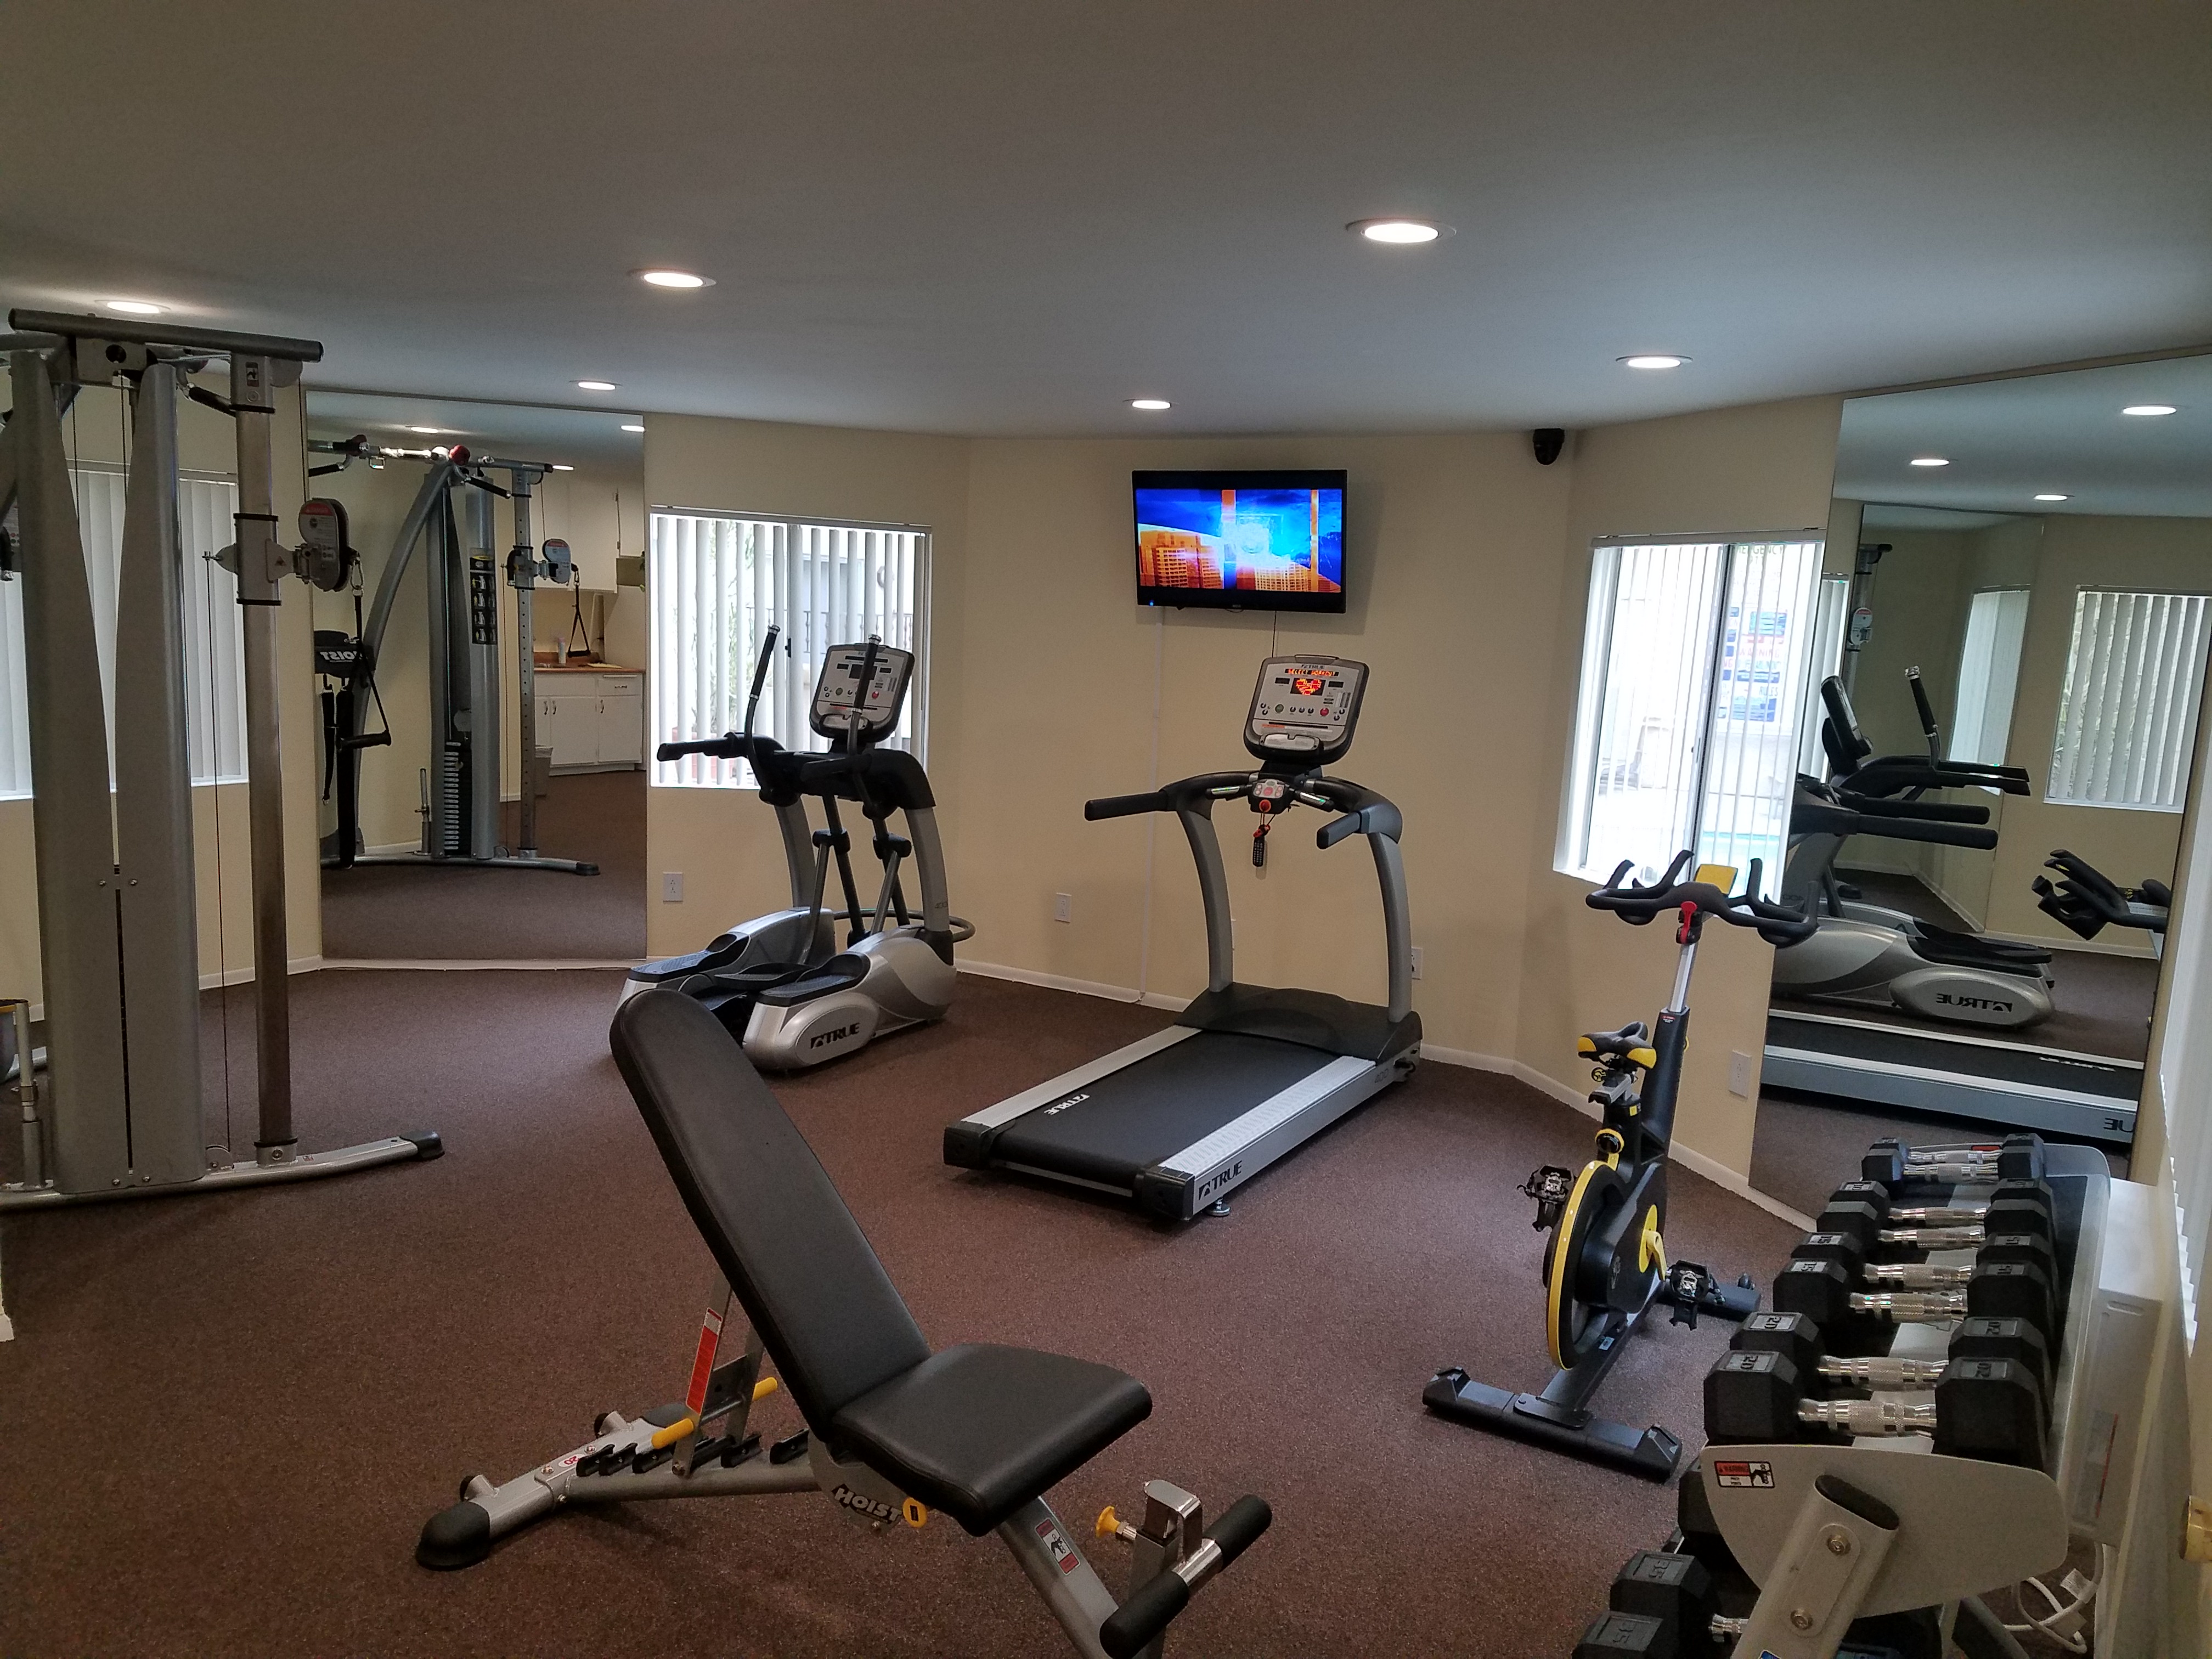 View of a gym, brown carpet, workout equipments including weights, a TV hanging from the wall, mirrors, white windows with white vertical blinds.